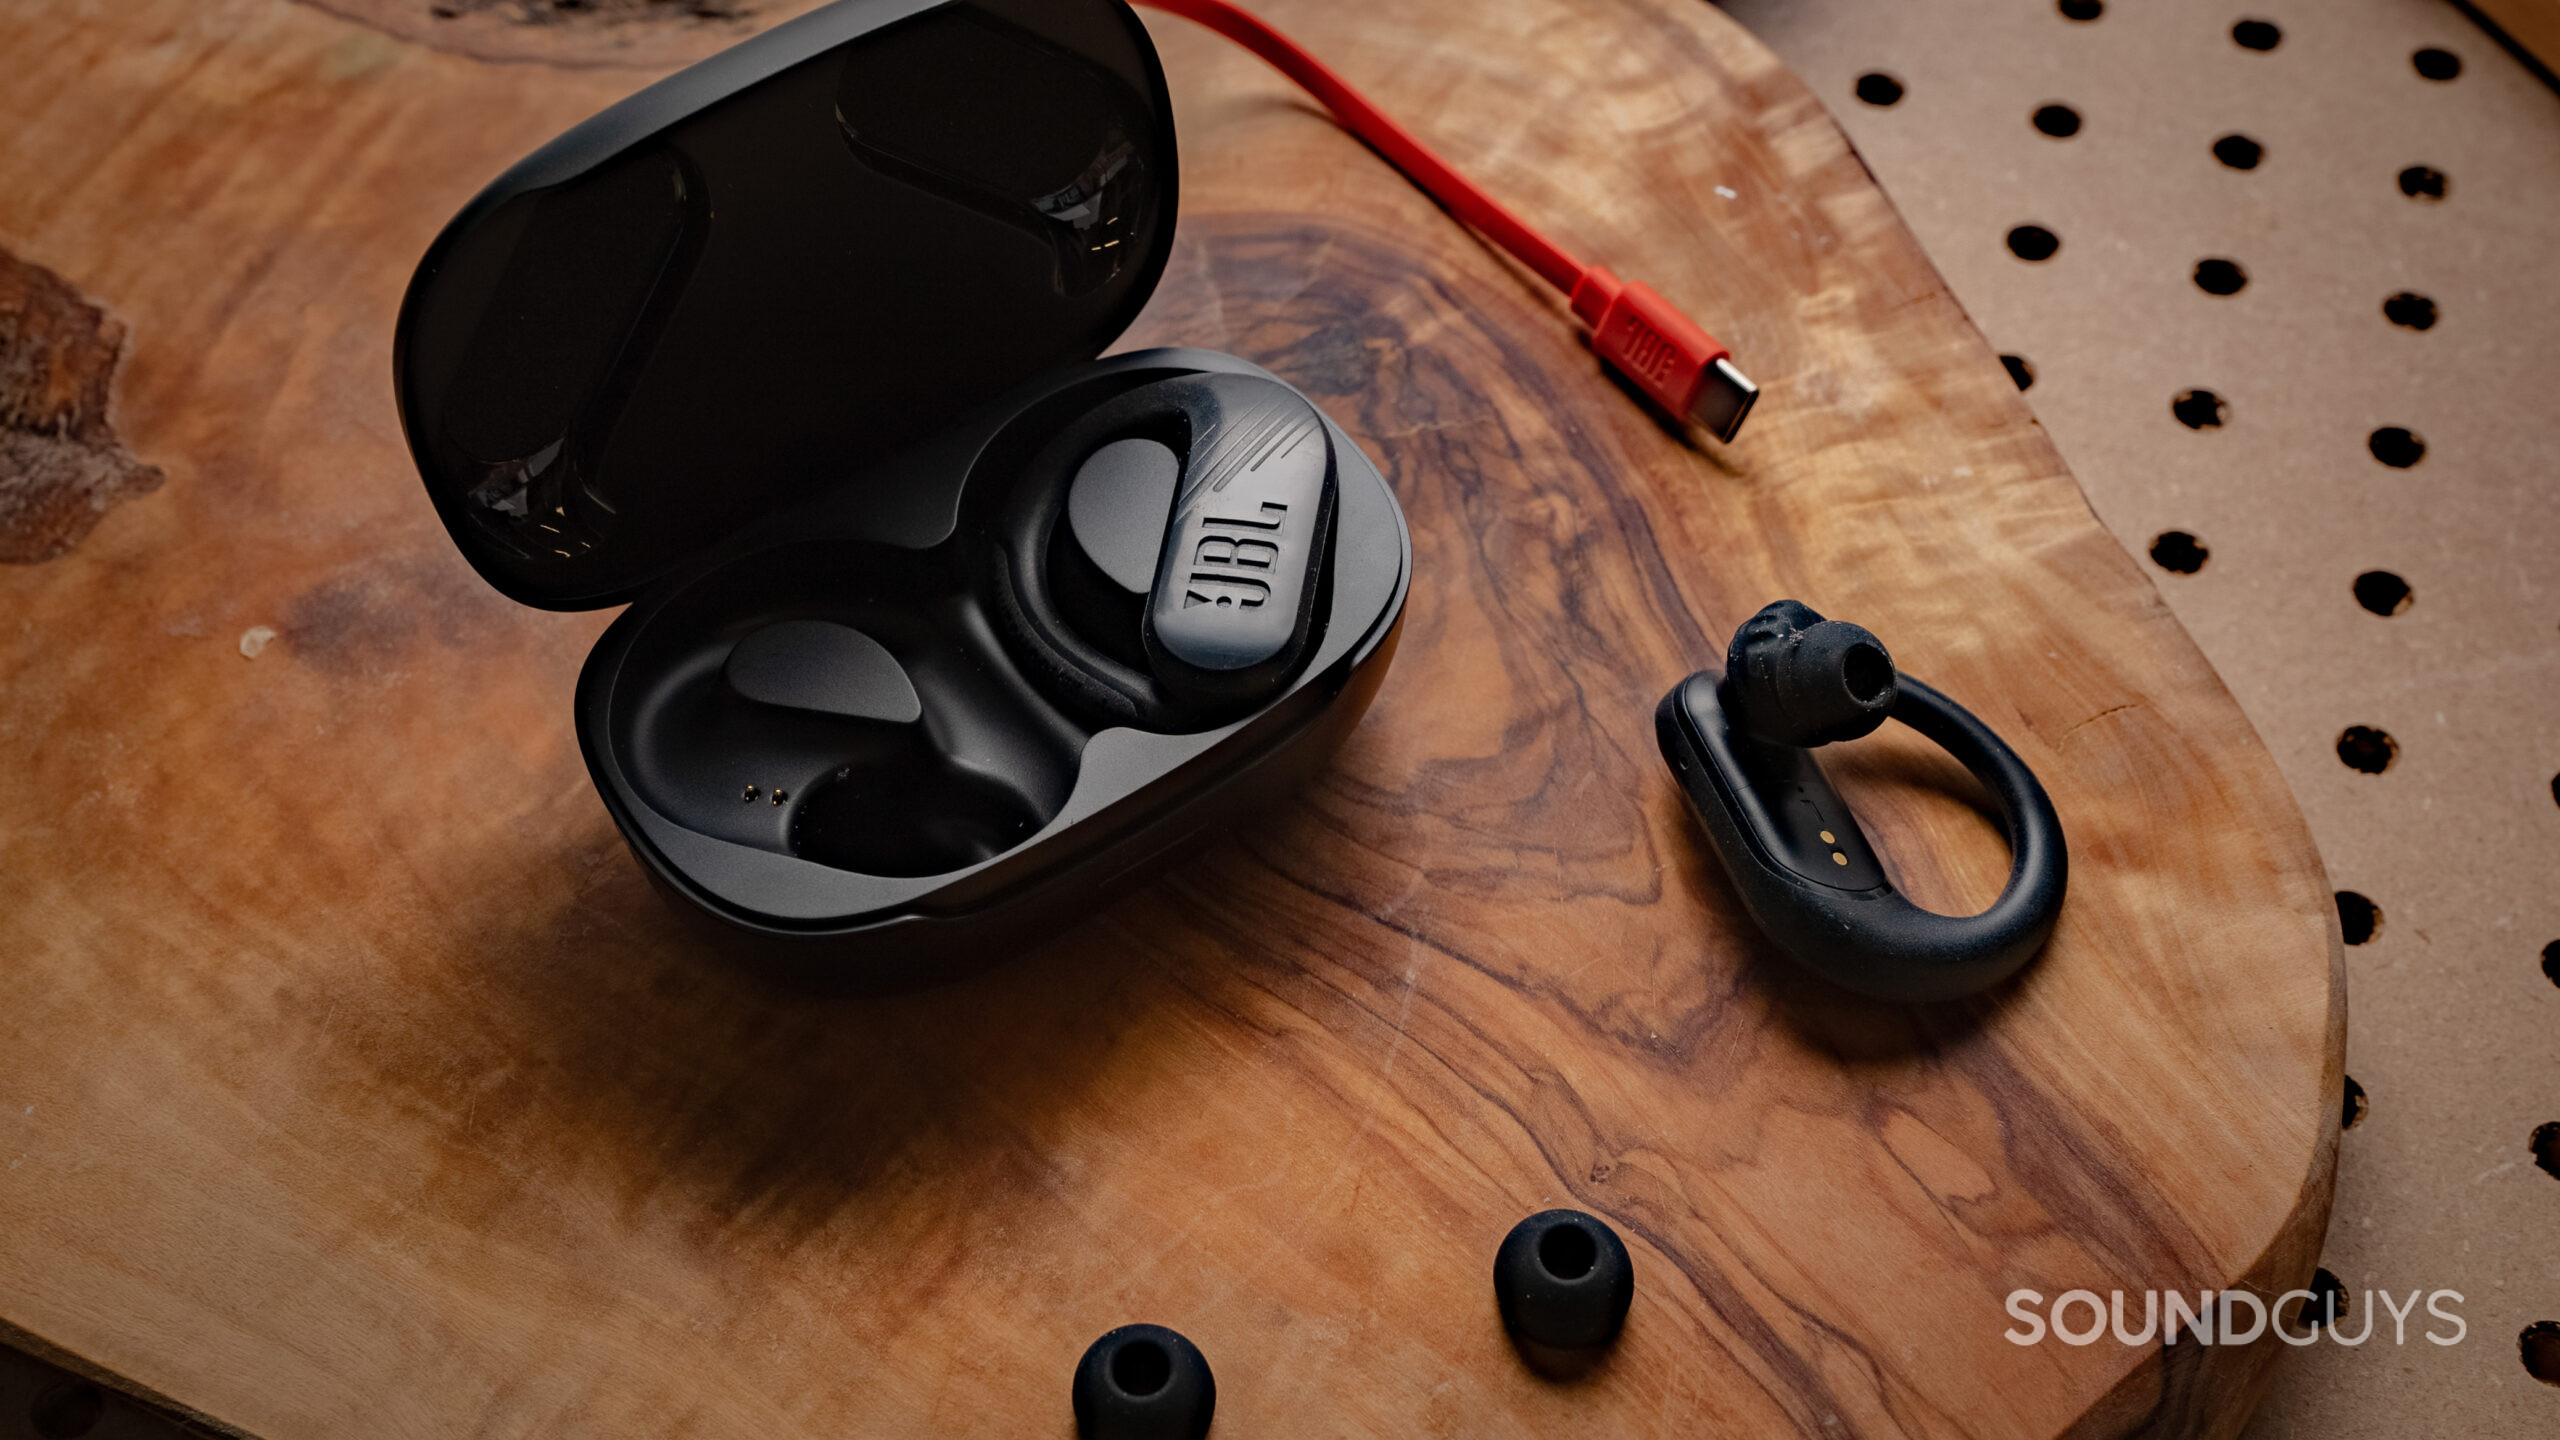 JBL Endurance Peak 3 earbuds, ear tips, and charging cable on table